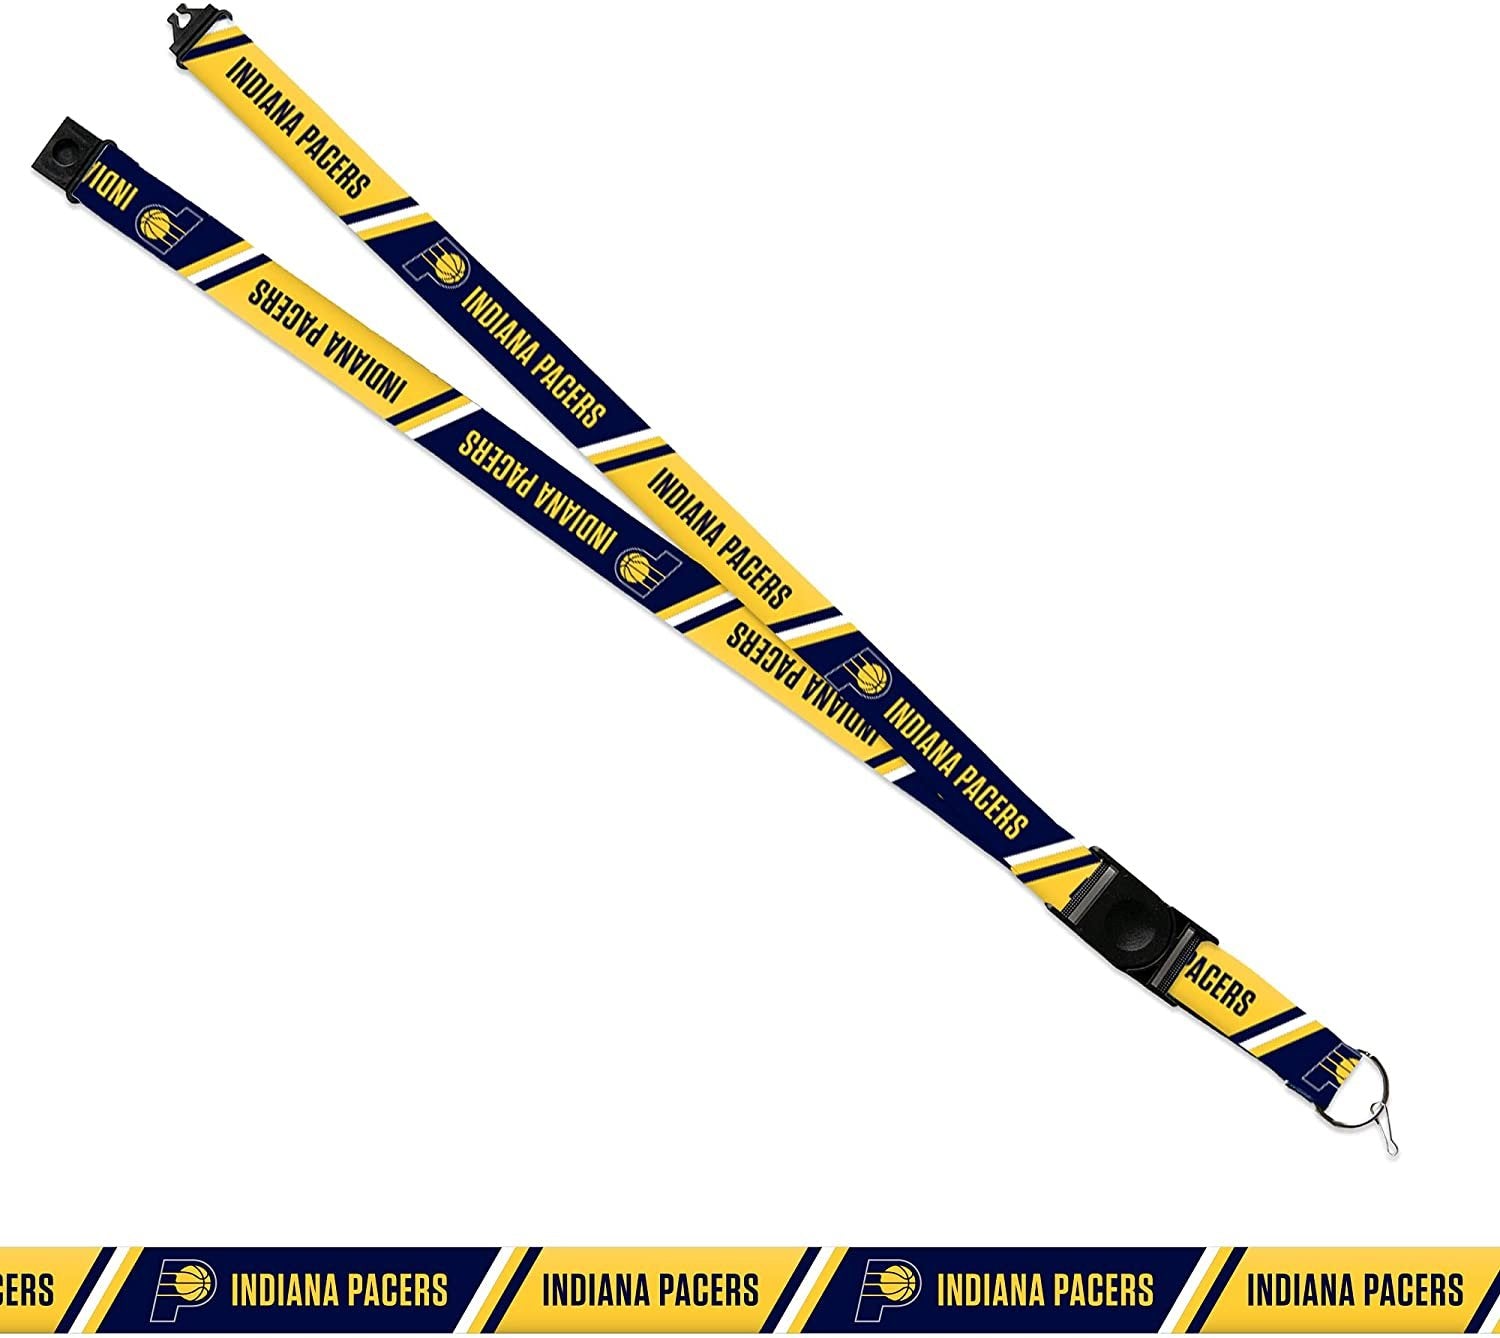 Indiana Pacers Premium Lanyard Keychain 18 Inch Button Clip Safety Breakaway